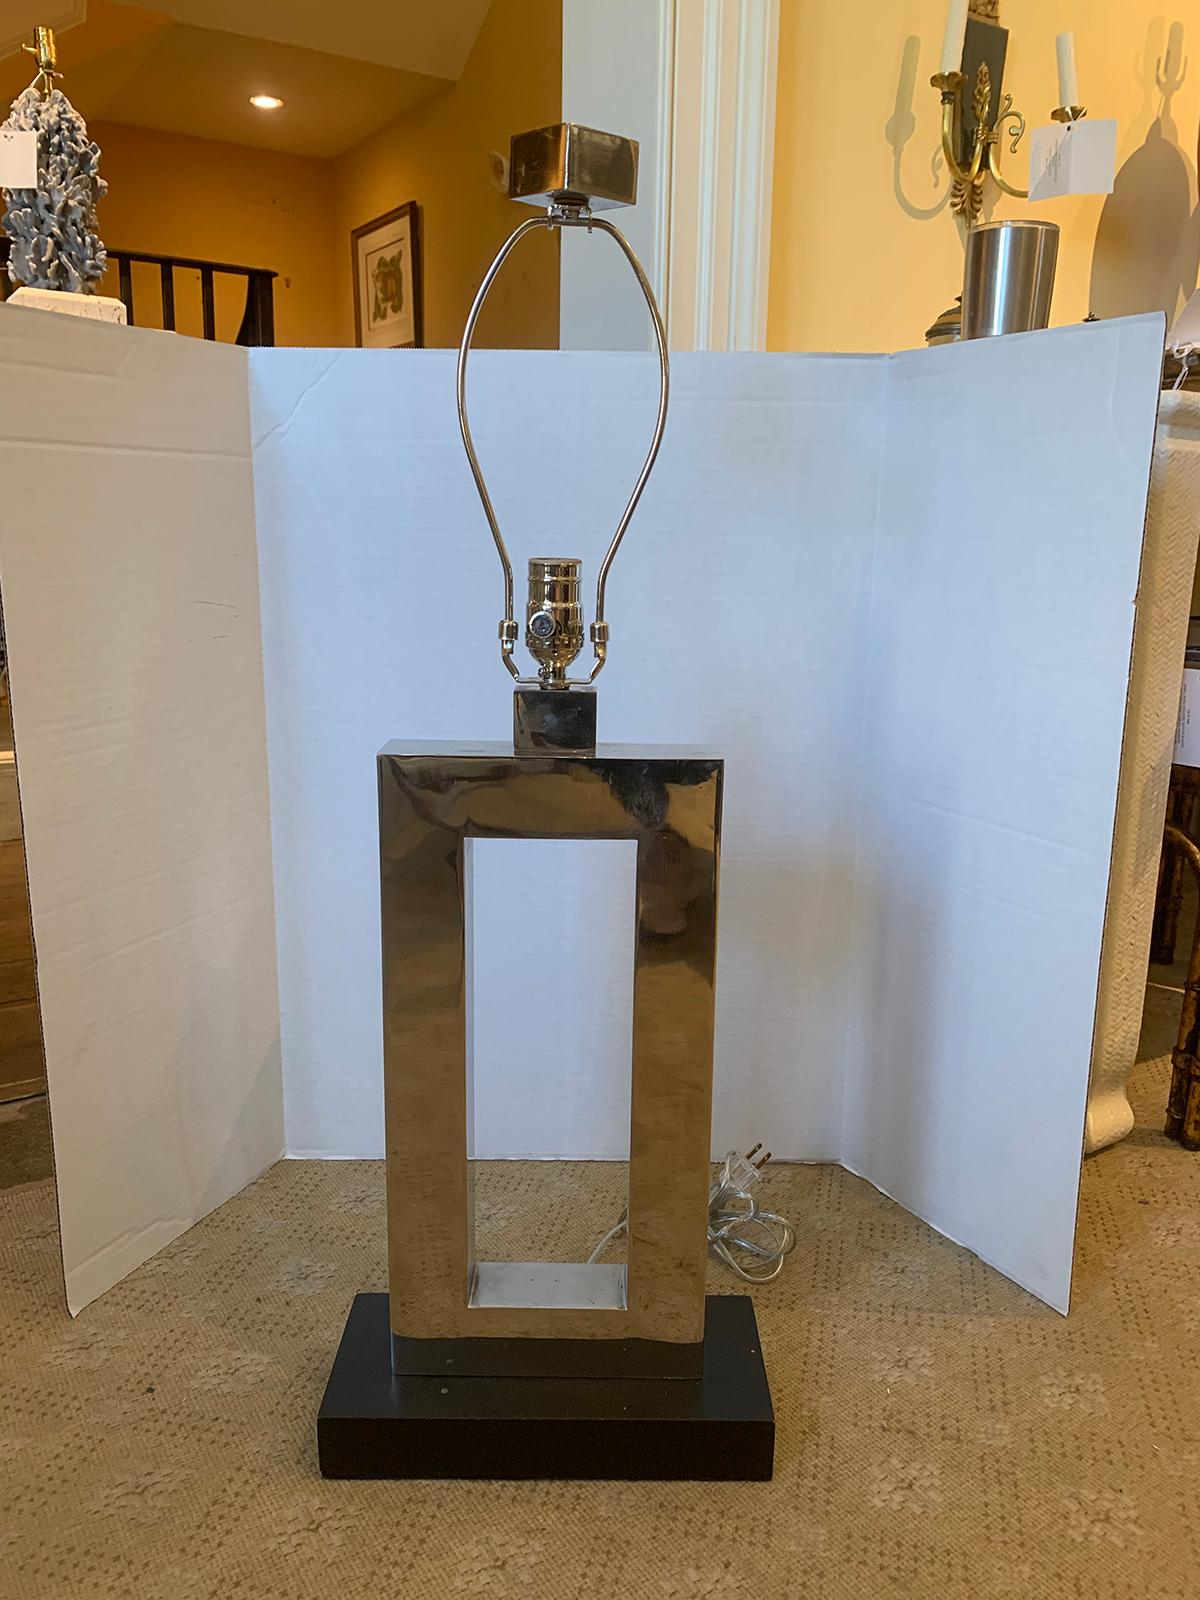 Mid-20th century rectangular silver lamp with matching finial. Black wood base
New wiring
Height is measured to the top of the socket.